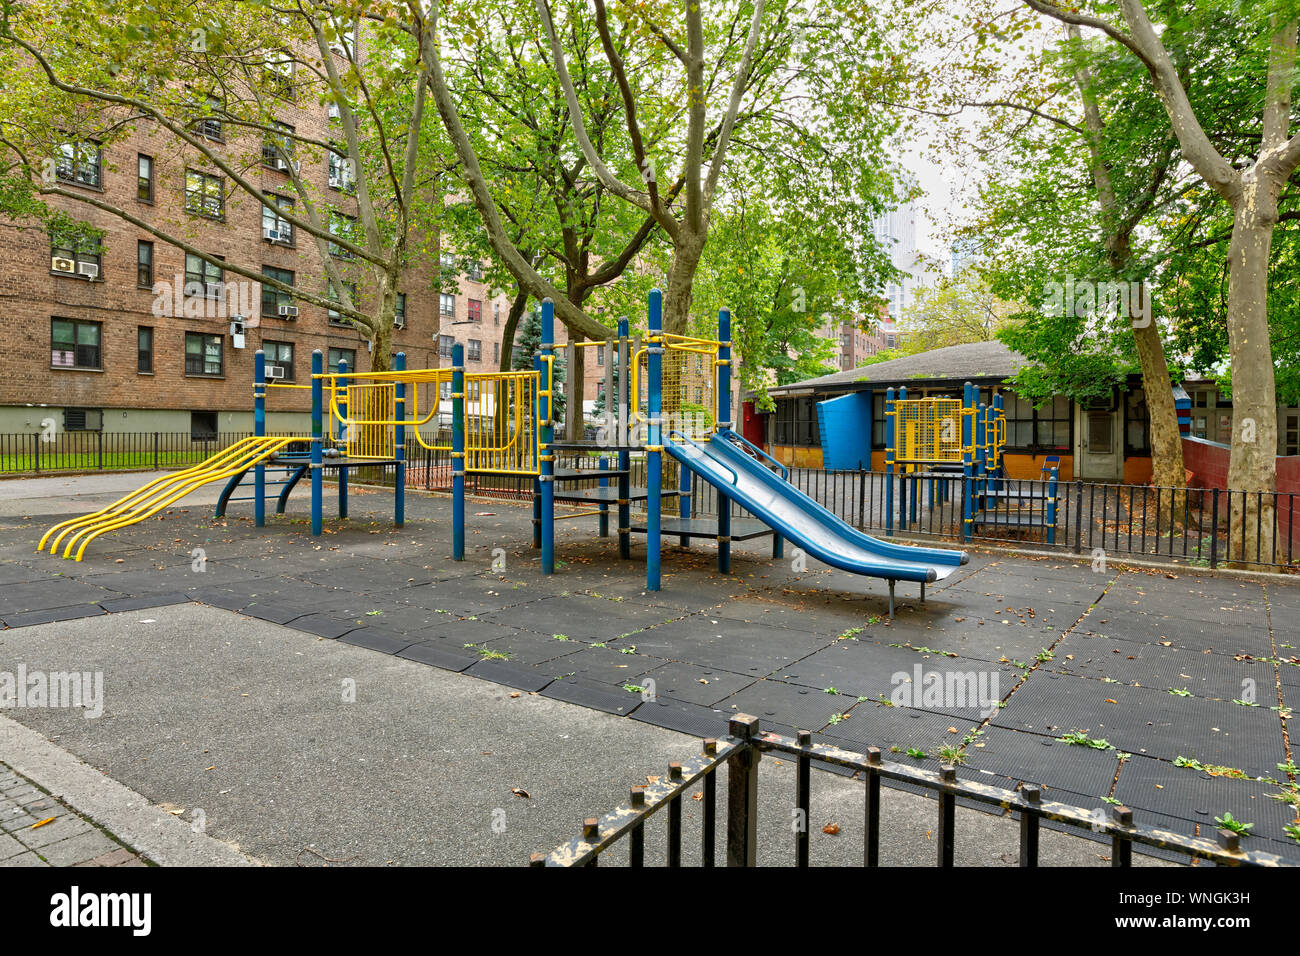 Playground within housing project in America Stock Photo